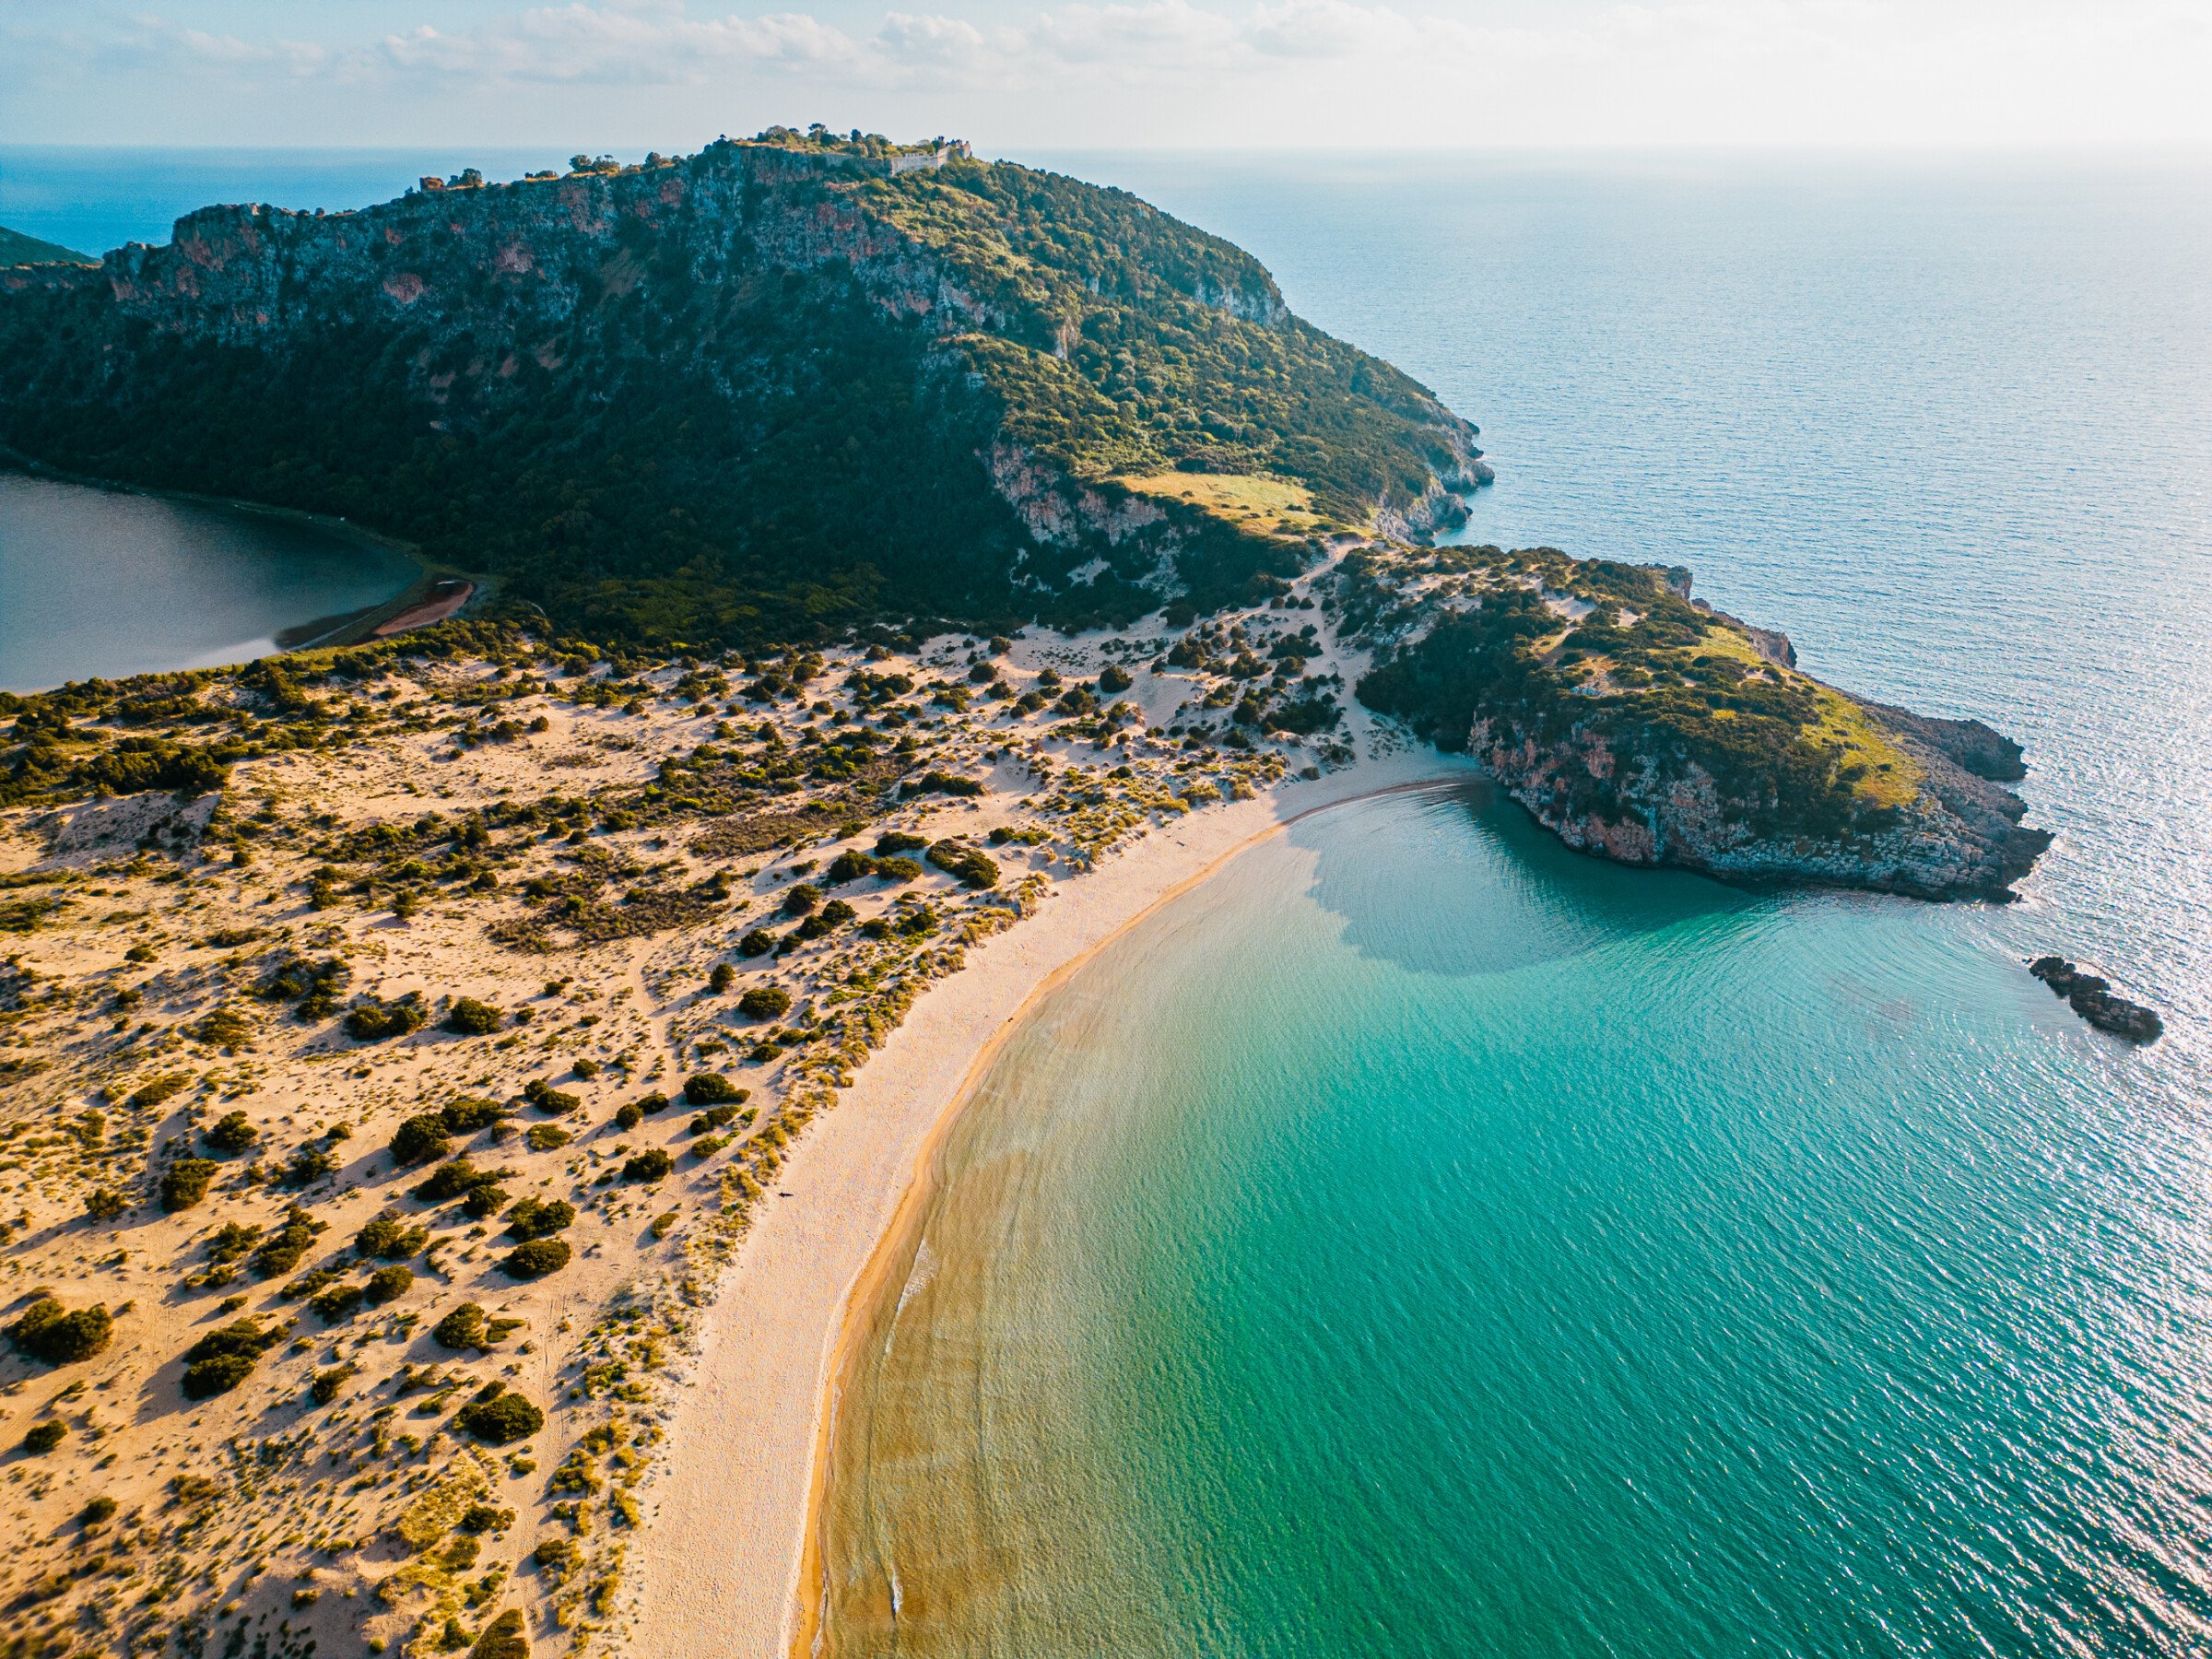 This is a drone shot of Voidokilia Beach with its shallow turquoise waters. 